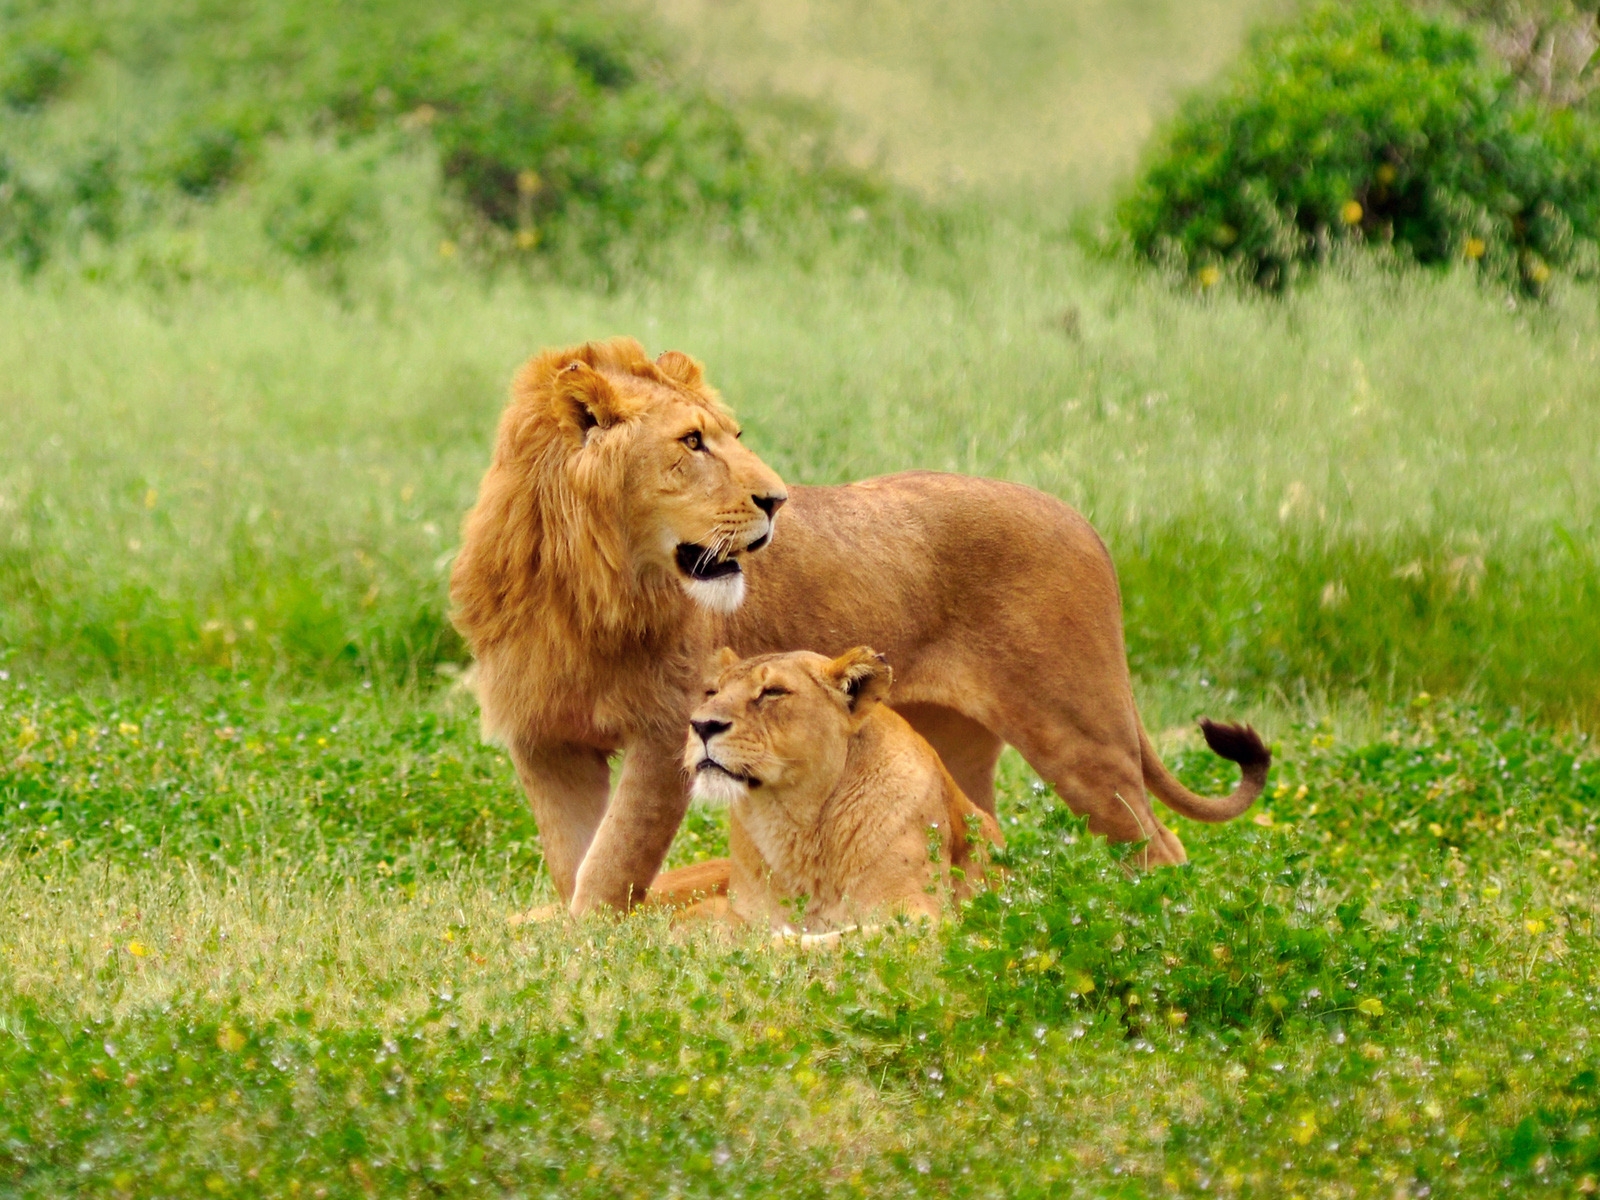 Lions on the grass for 1600 x 1200 resolution